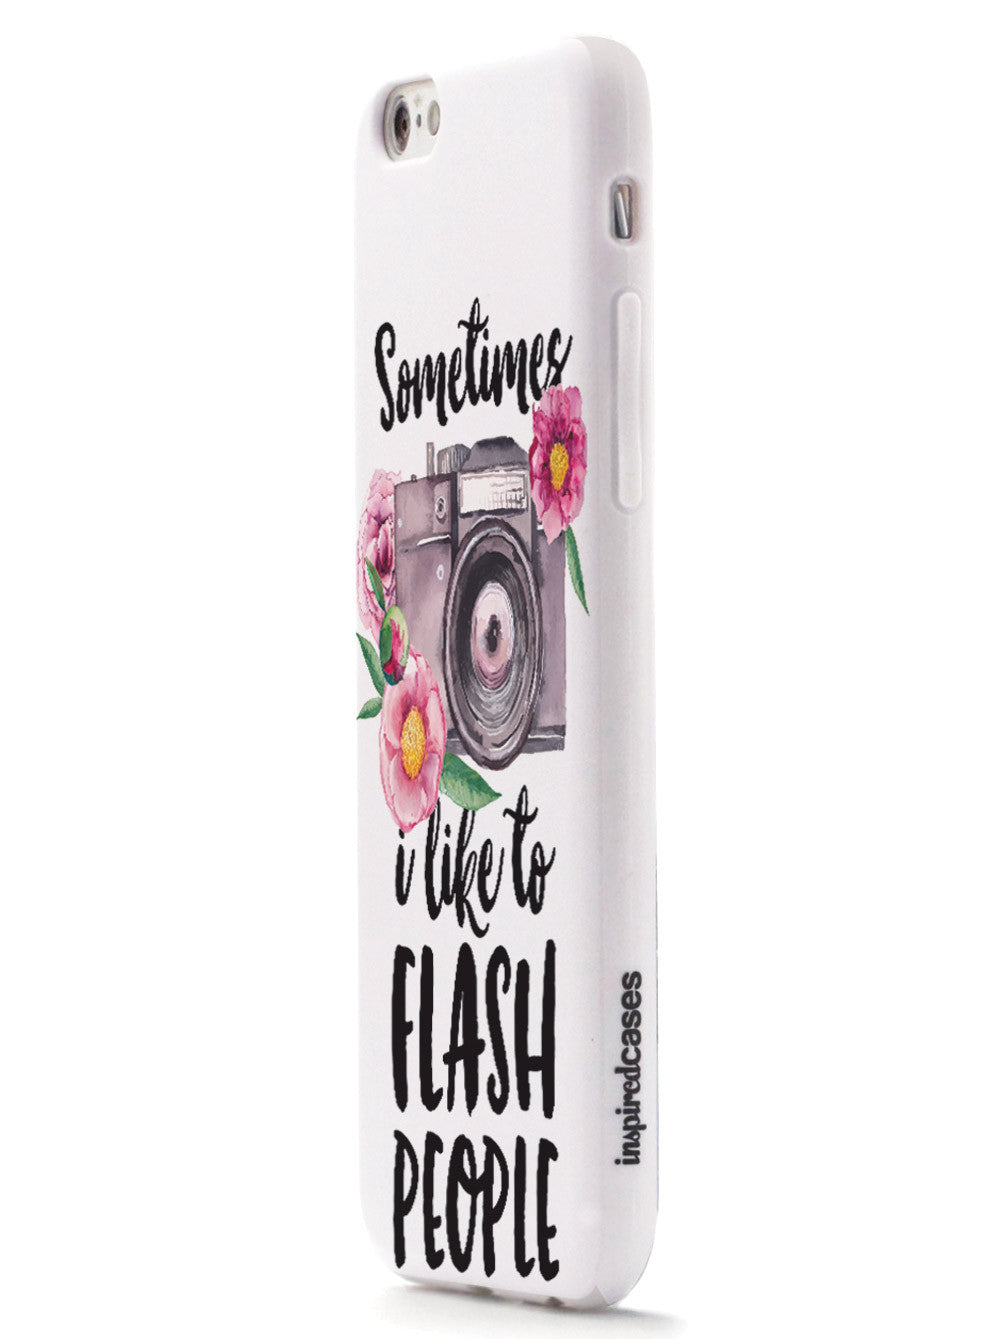 Sometimes I Like to Flash People - White Case